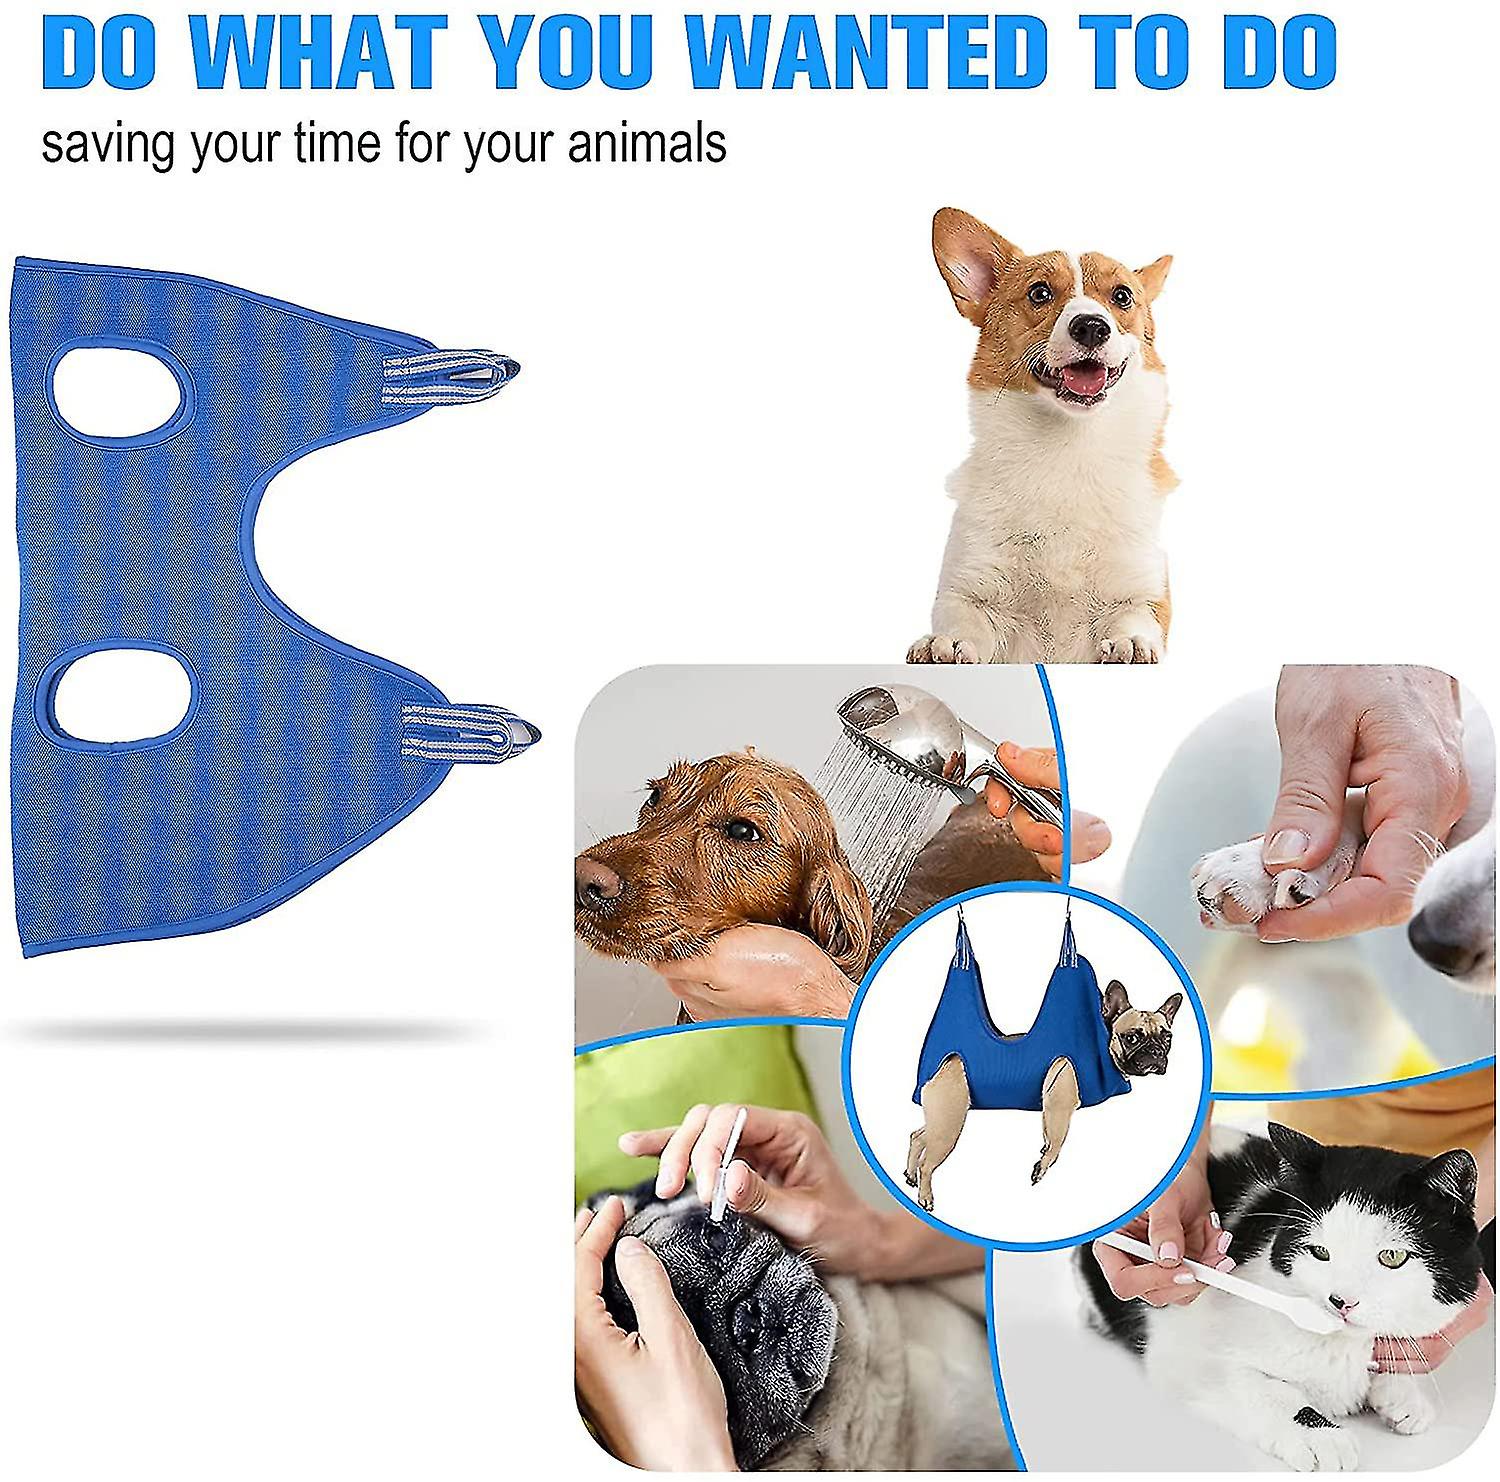 Dog Hammock Helper Dog Cat Grooming And Nail Trimming Pet Grooming Hammock  Restraint Bag For Dogs Bathing Trimming Nail Blue S